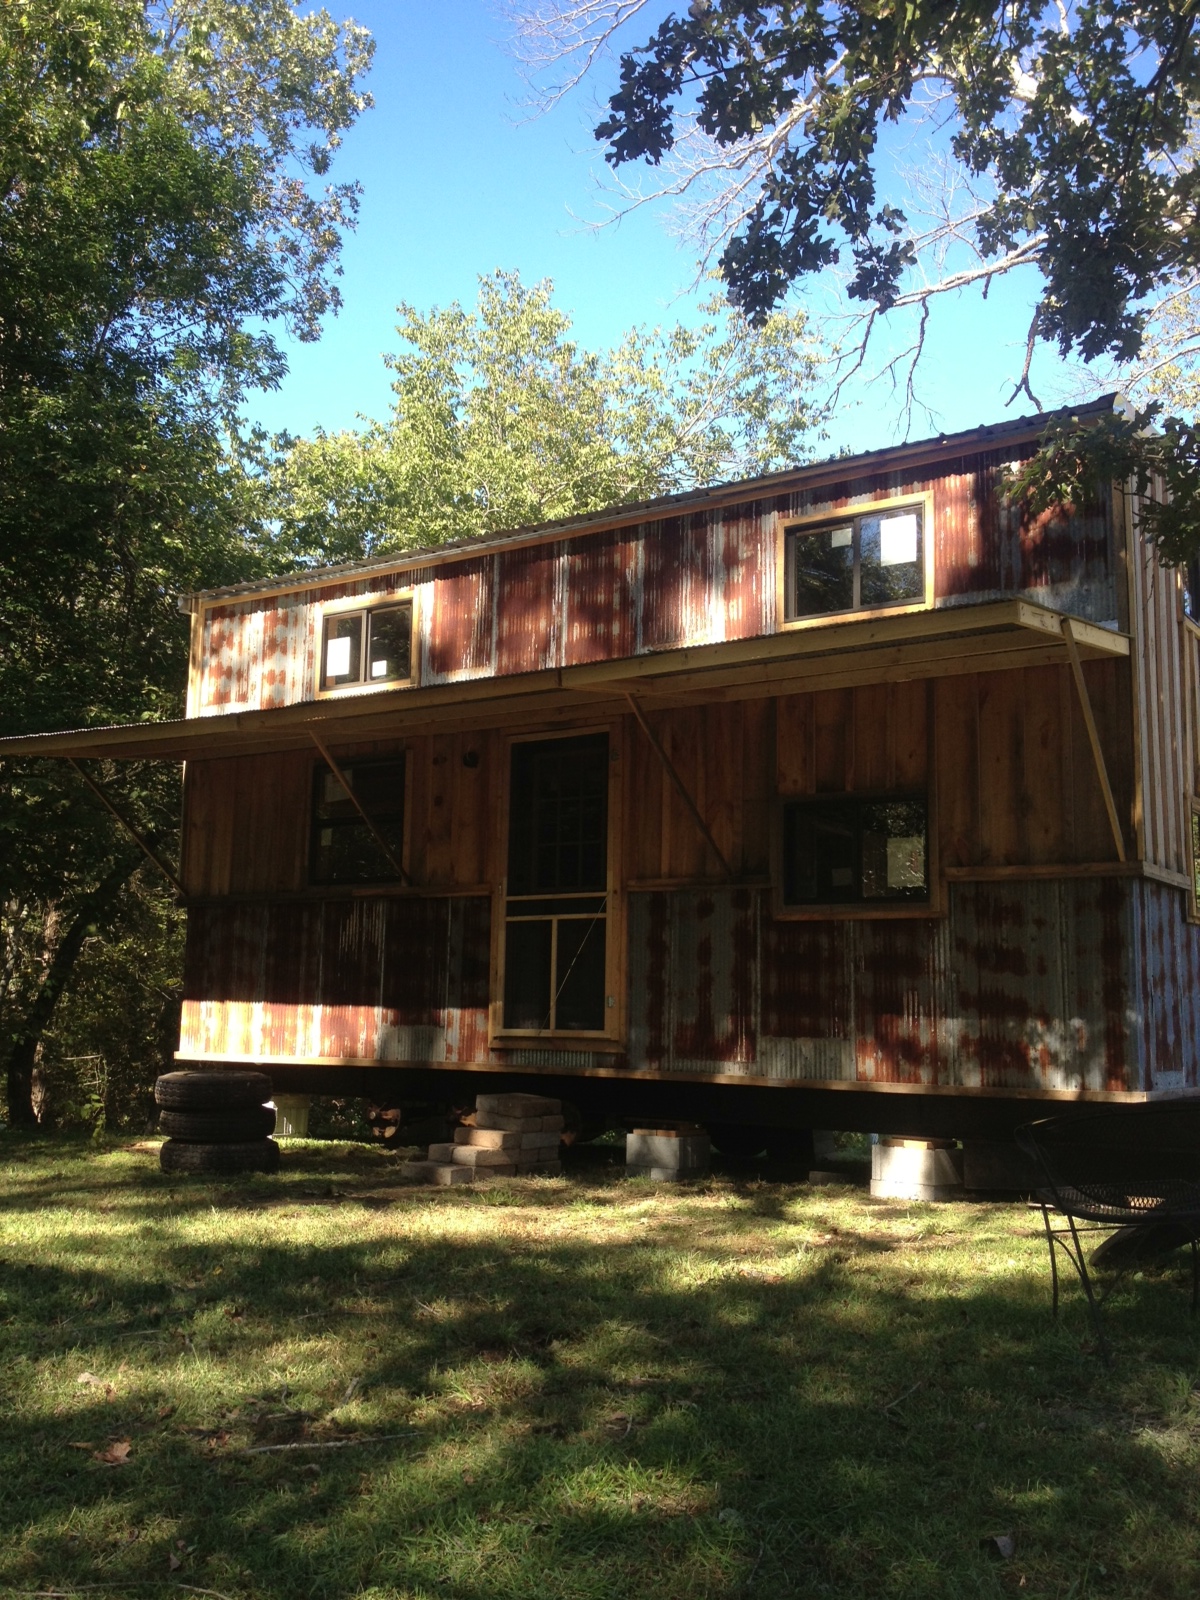 Cherae Stone's 240 square-foot house, made of Arkansas pine and corrugated tin, took just six months to construct.